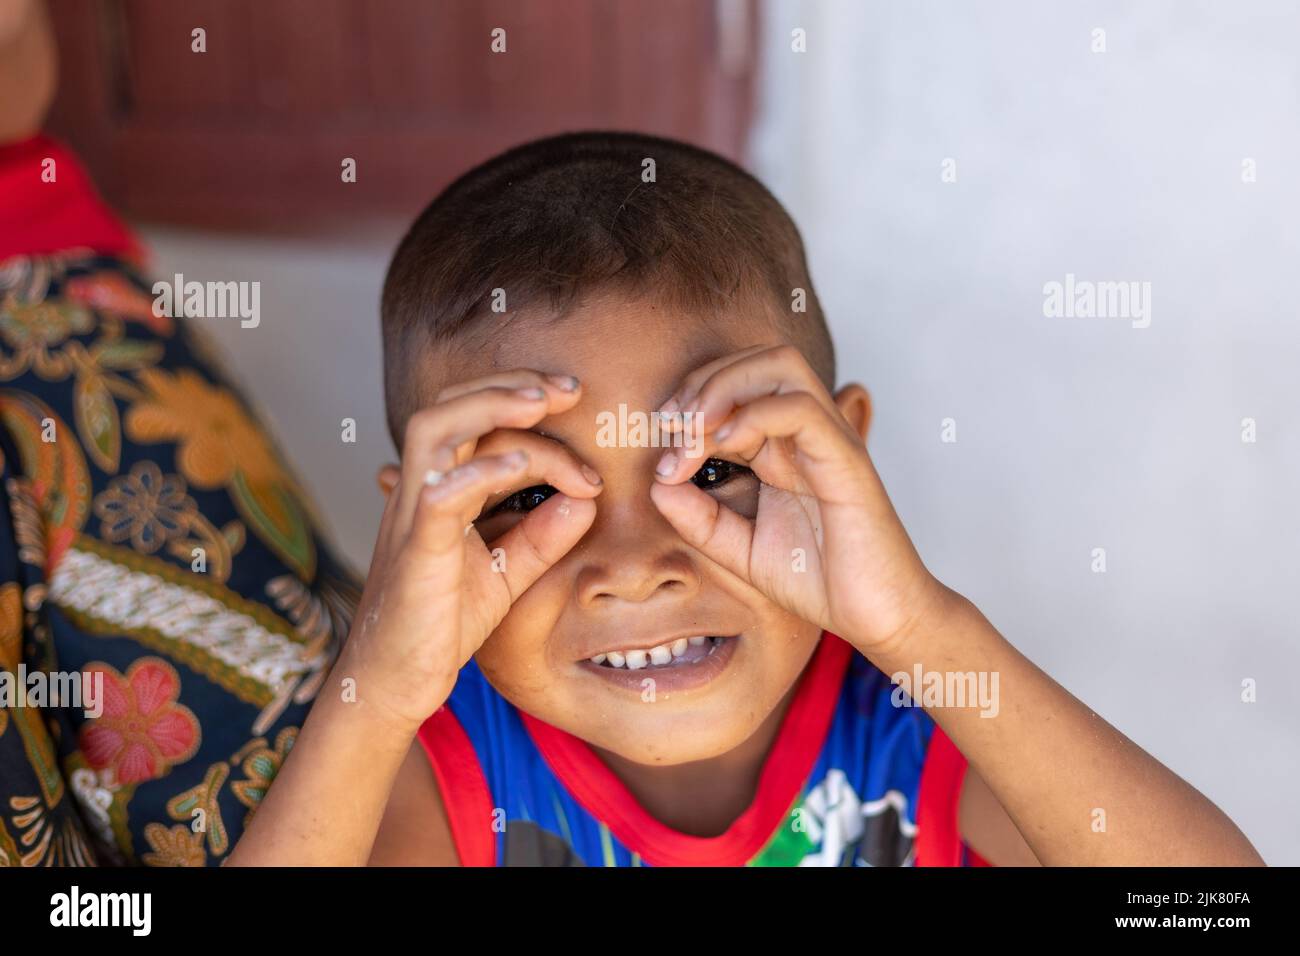 A young Thai boy puts his fingers around his eyes like binoculars making a funny face Stock Photo